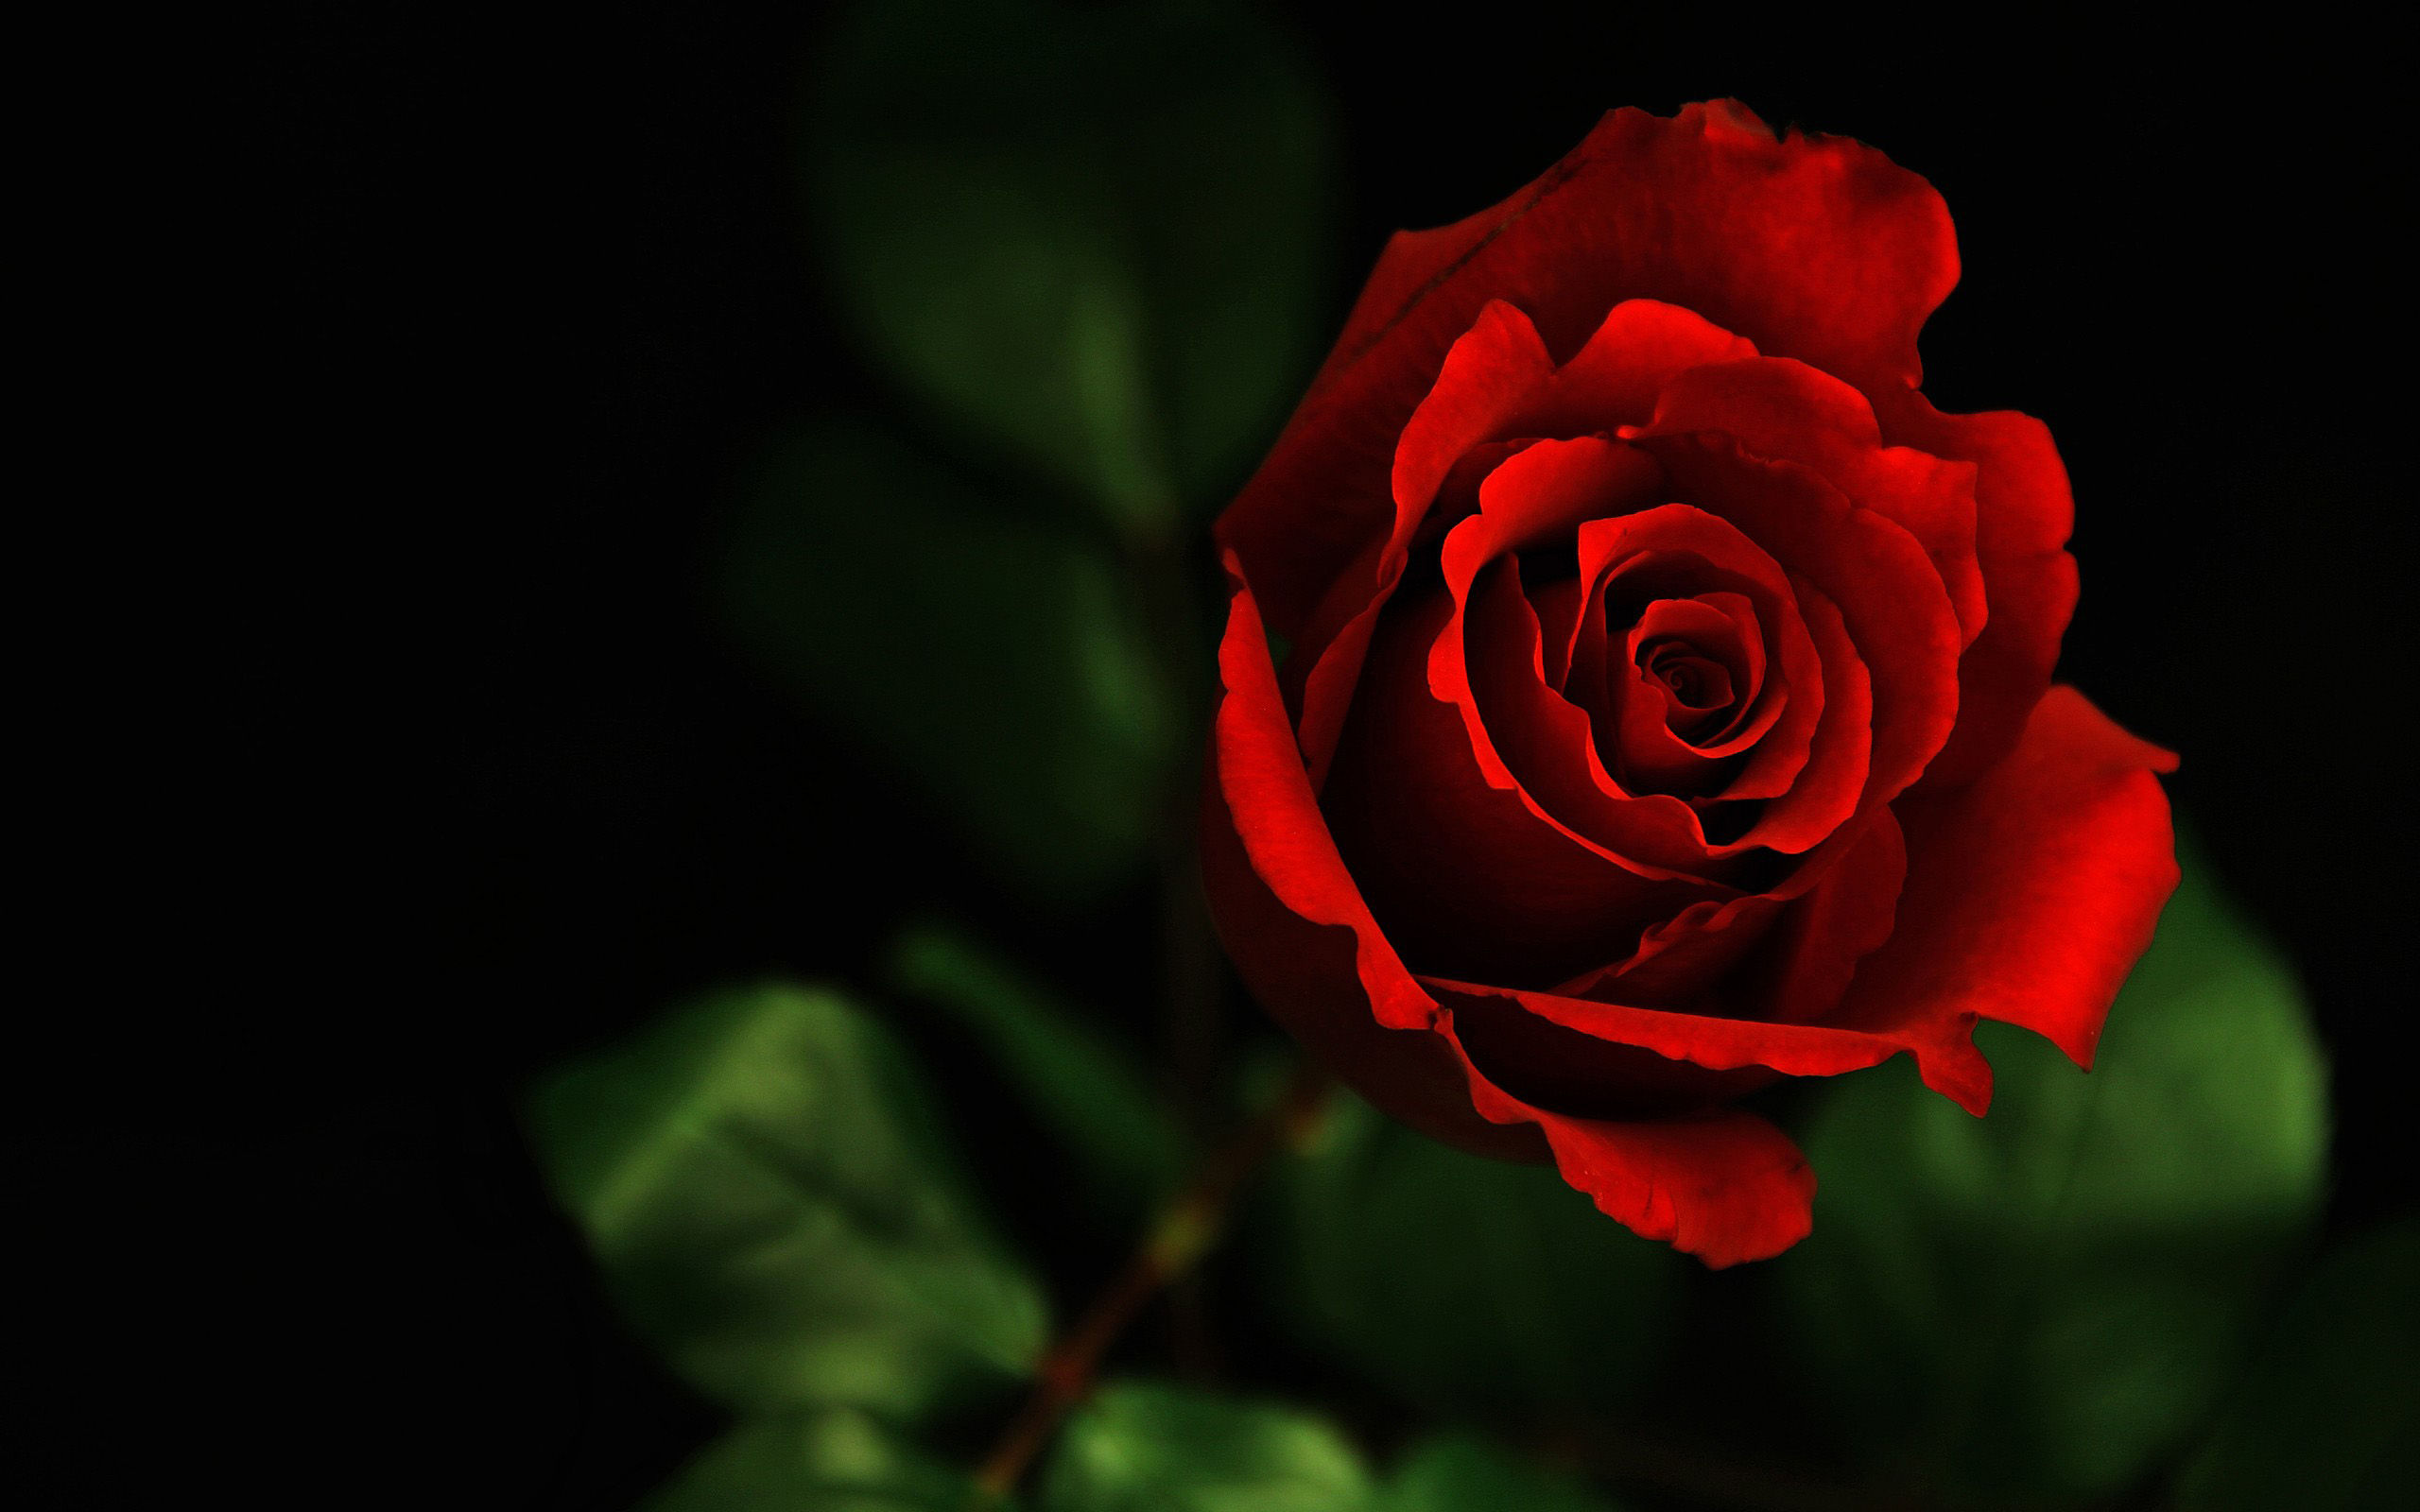 Dark Red Rose Flower Image Top Collection Of Different Types